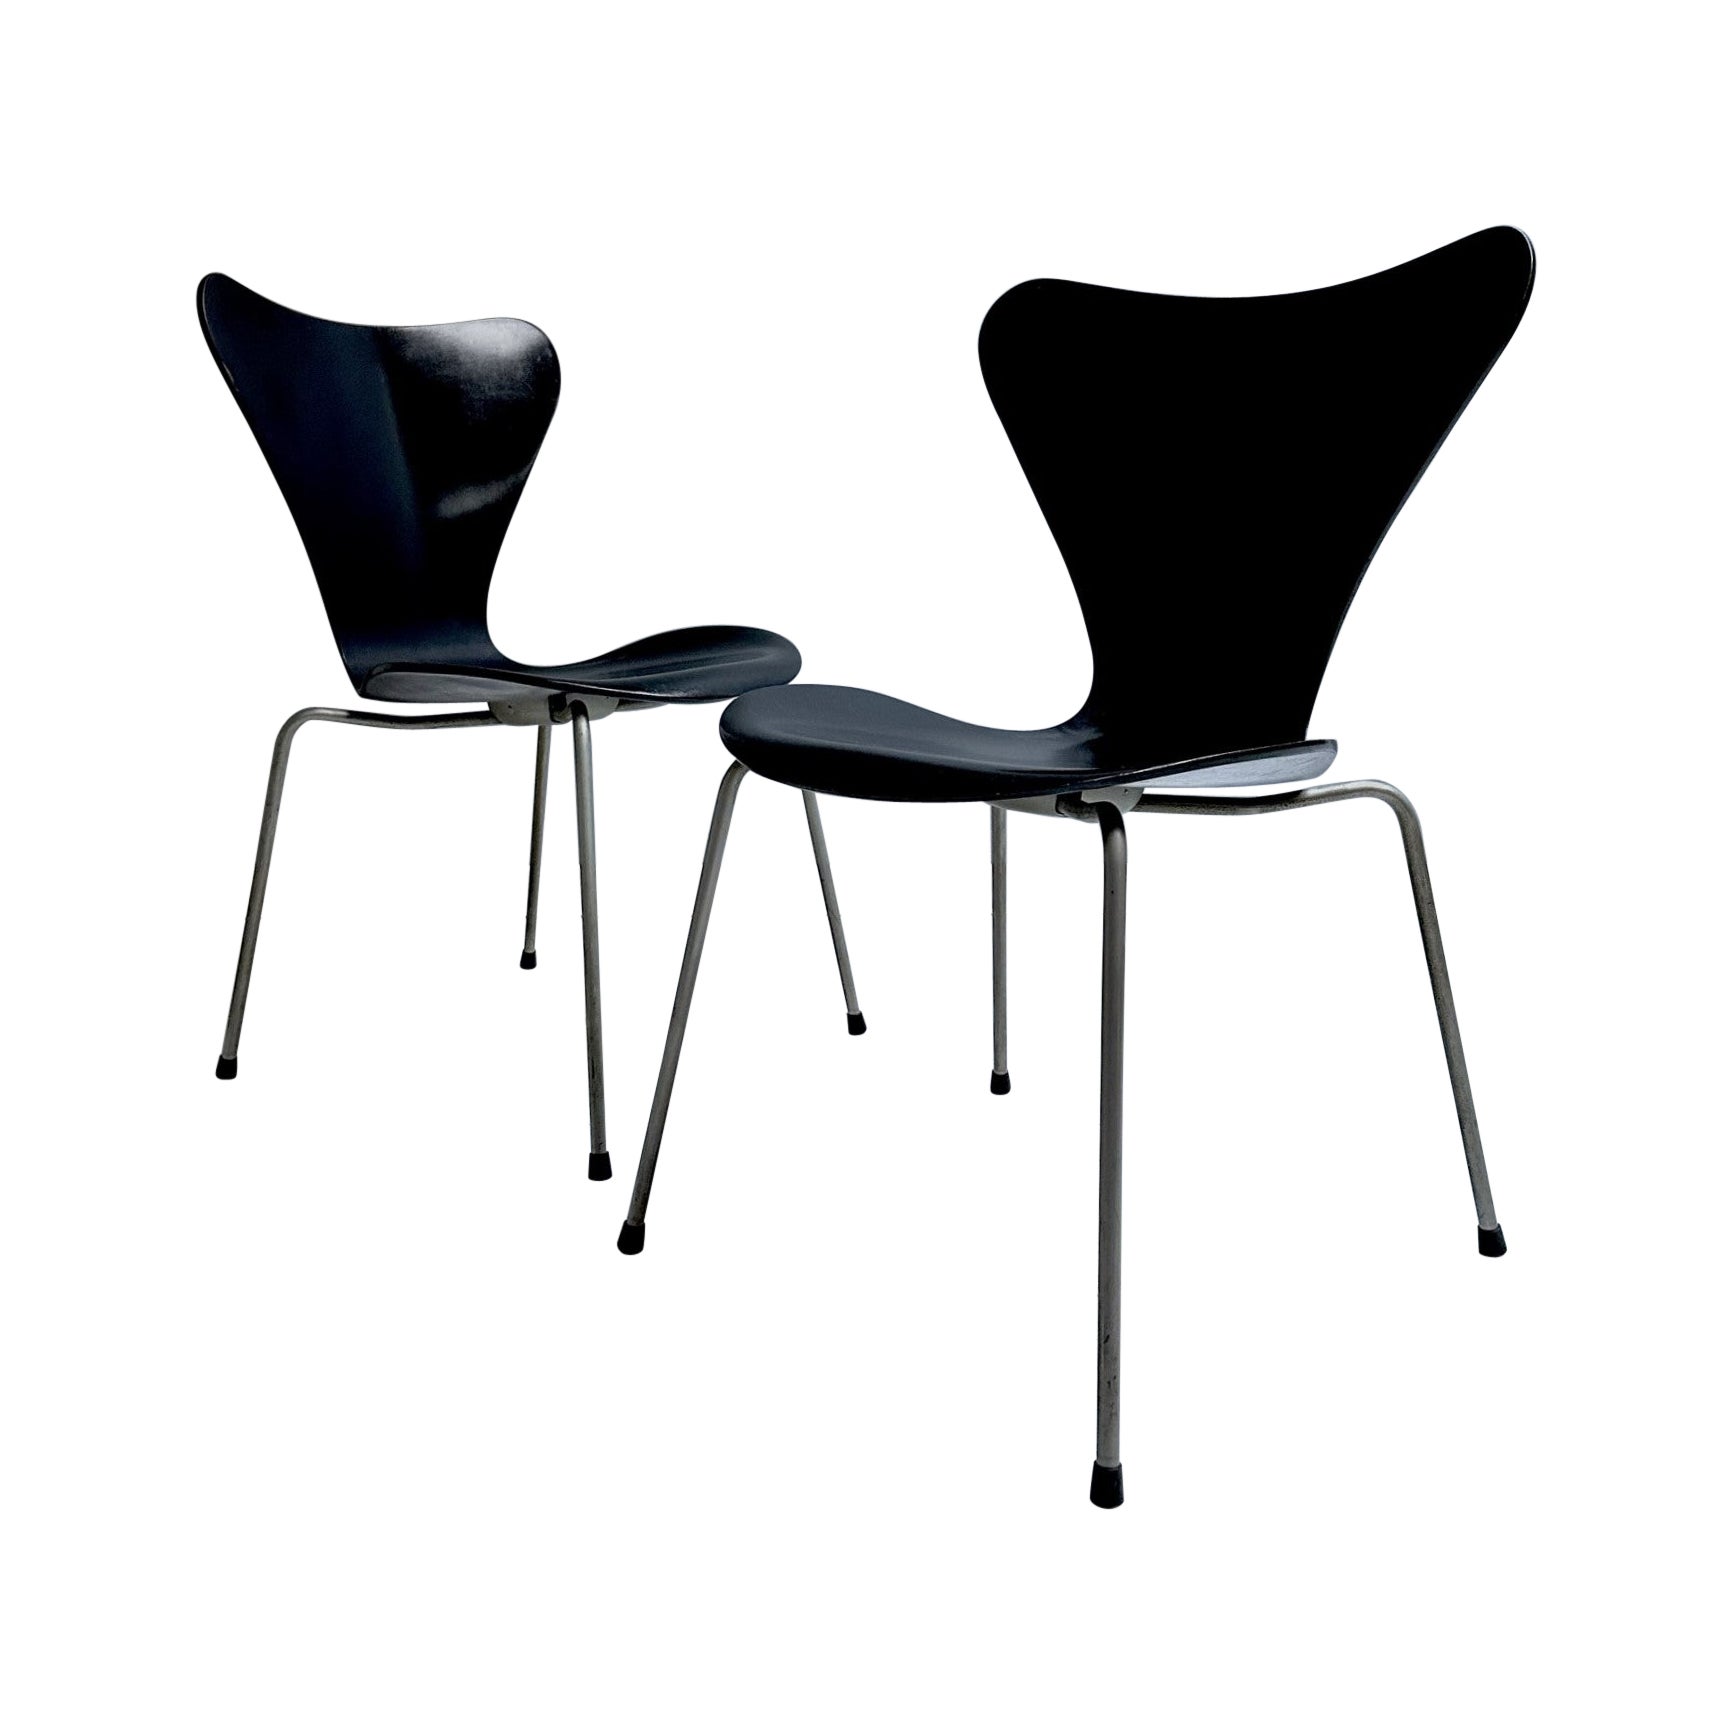 Pair of danish chairs mod. 3107 by Arne Jacobsen for Fritz Hansen, 1970 For Sale